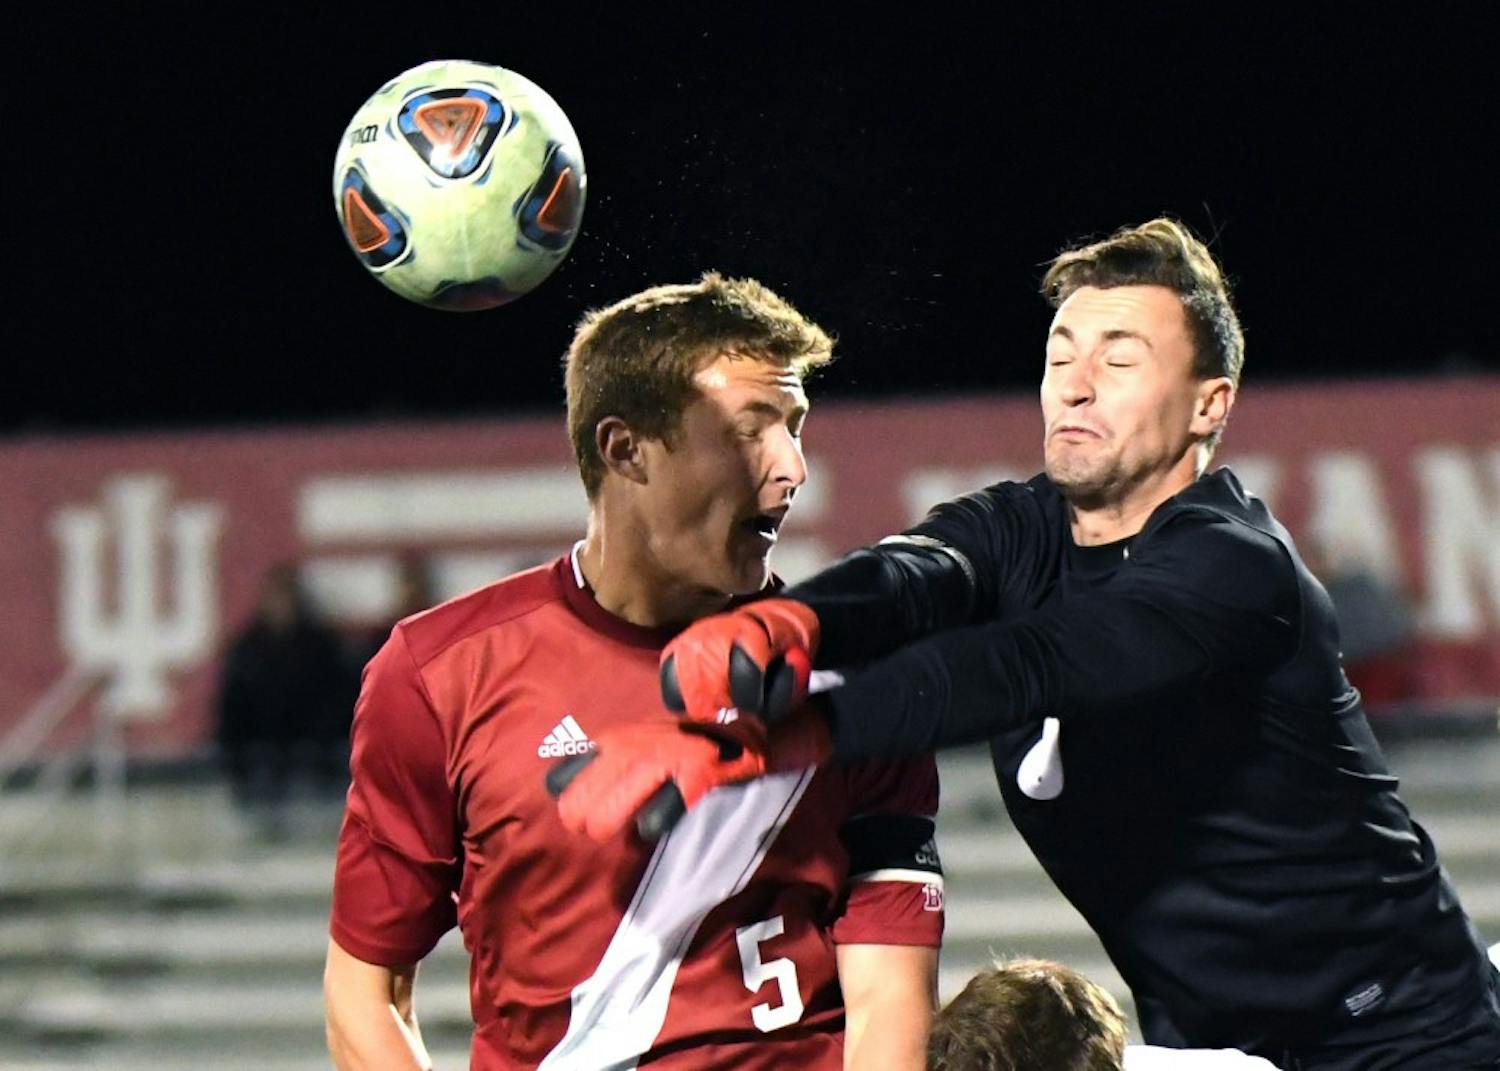 GALLERY: IU men's soccer advances to NCAA tournament quarterfinals after win over New Hampshire